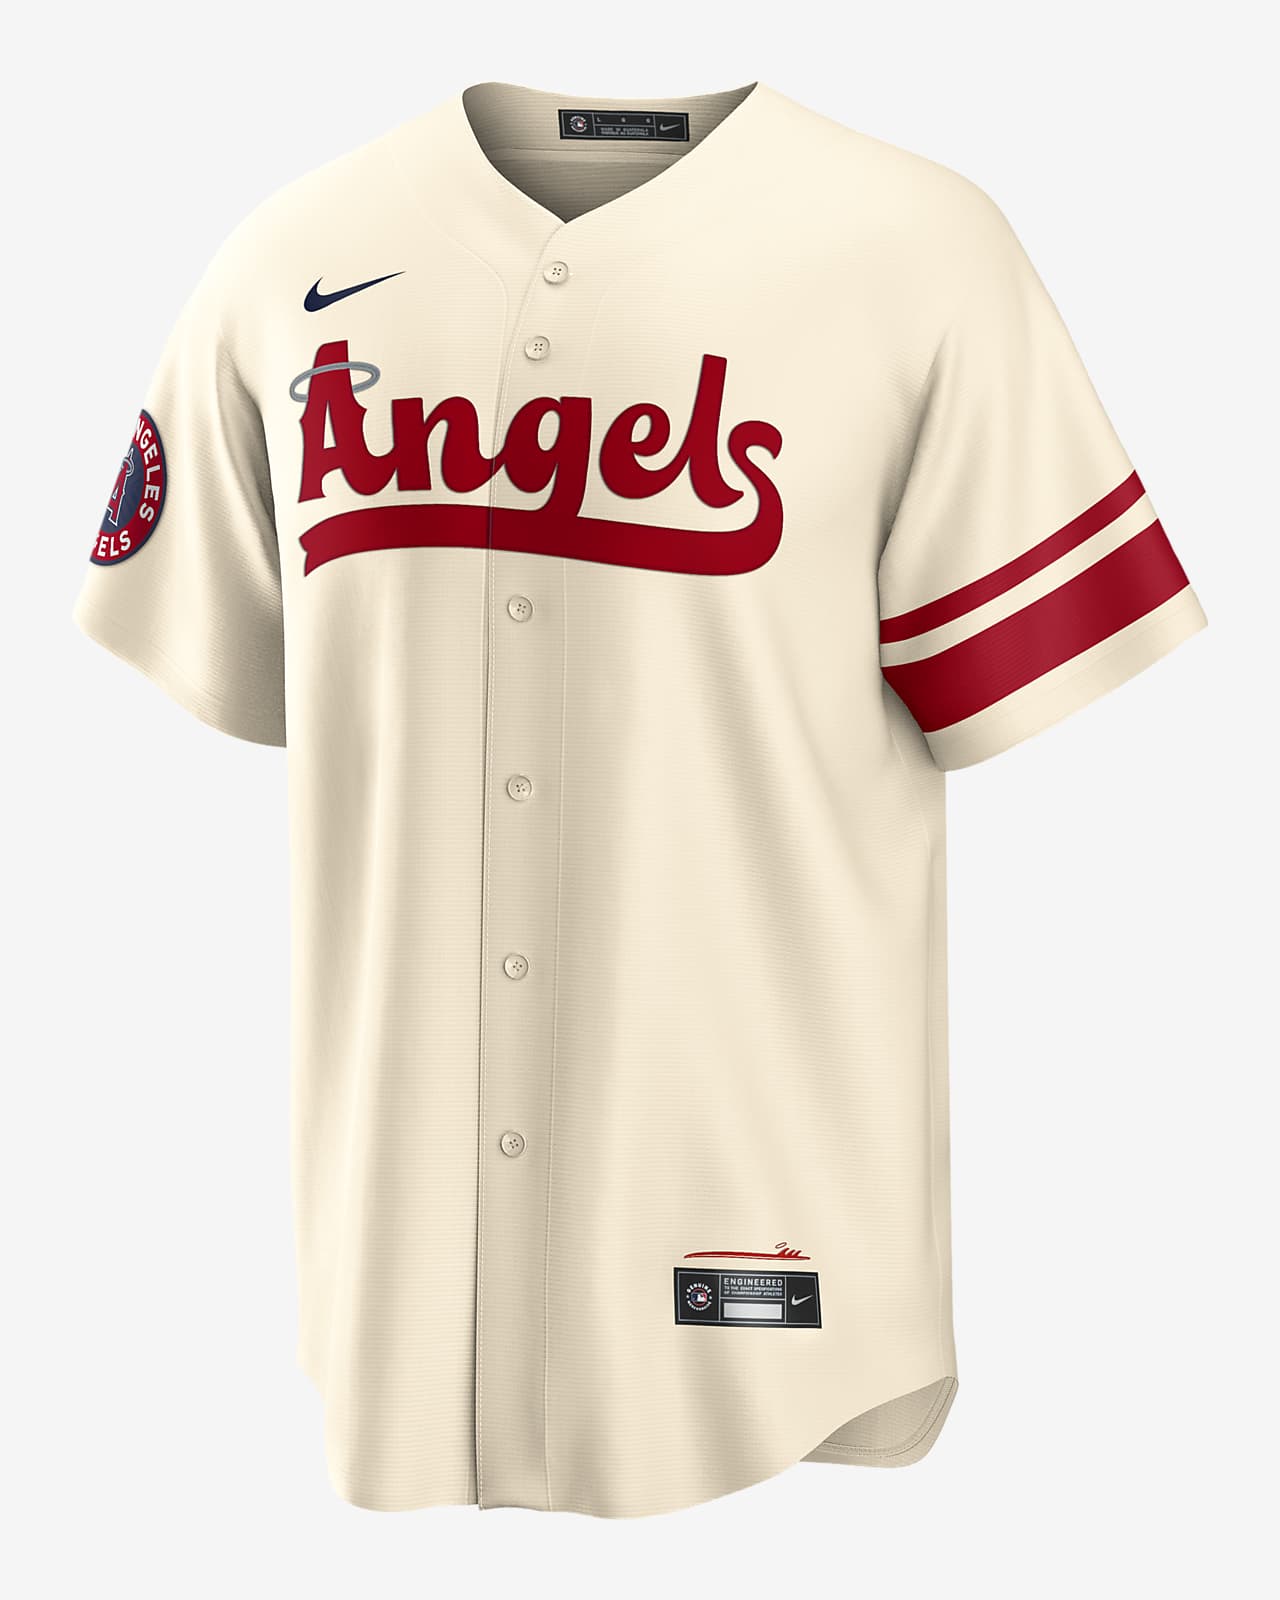 los angeles angels city edition jersey